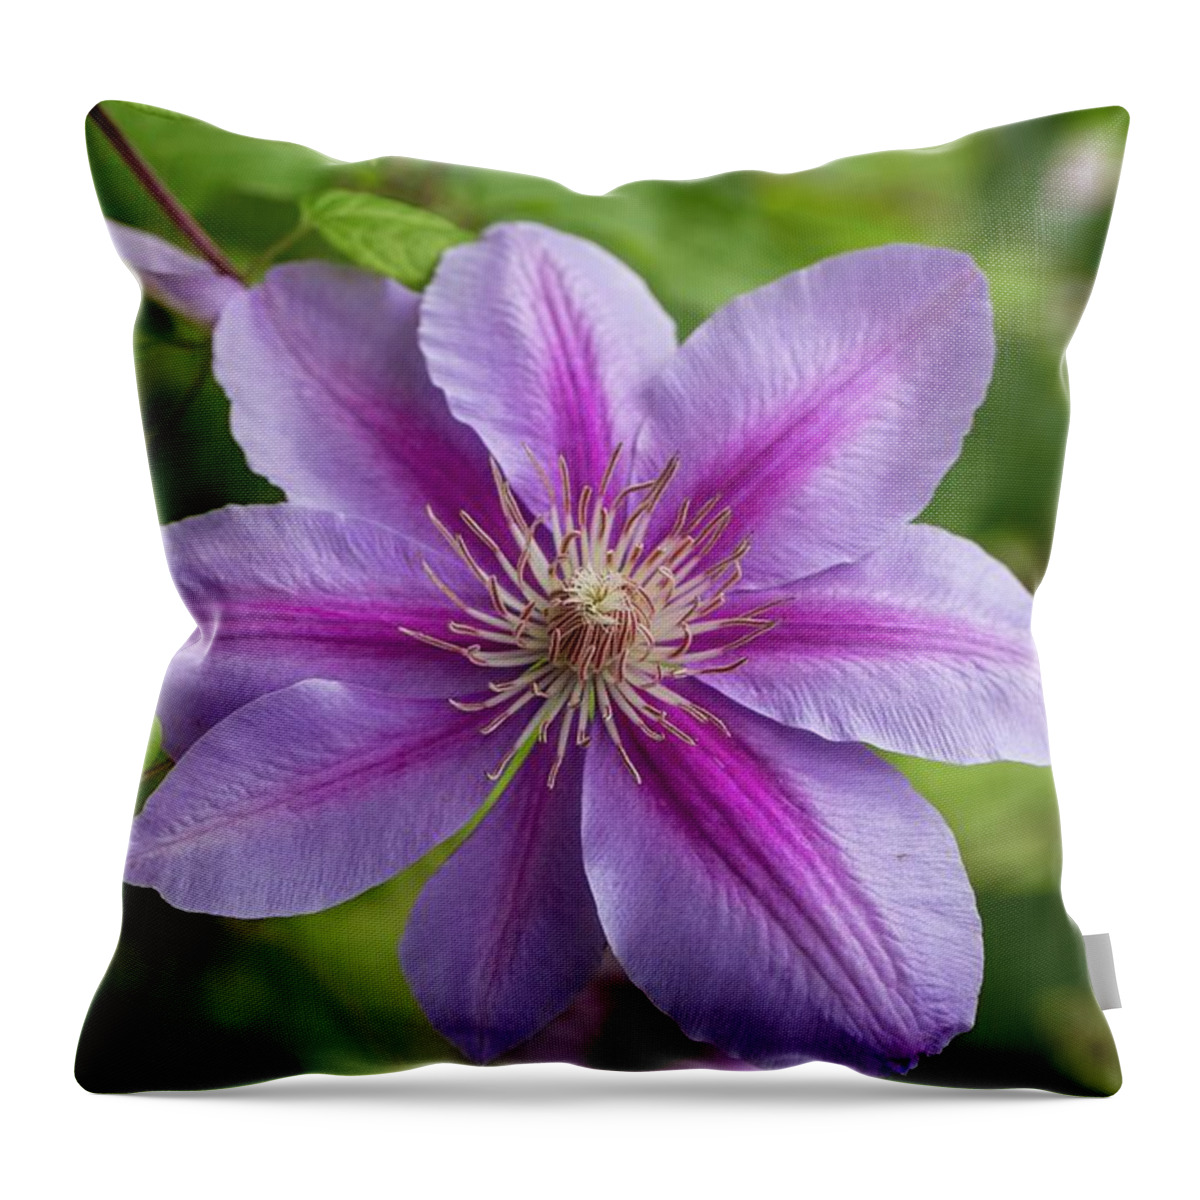 Pink And White Clematis Throw Pillow featuring the photograph Pink and White Clematis by Lynn Hopwood